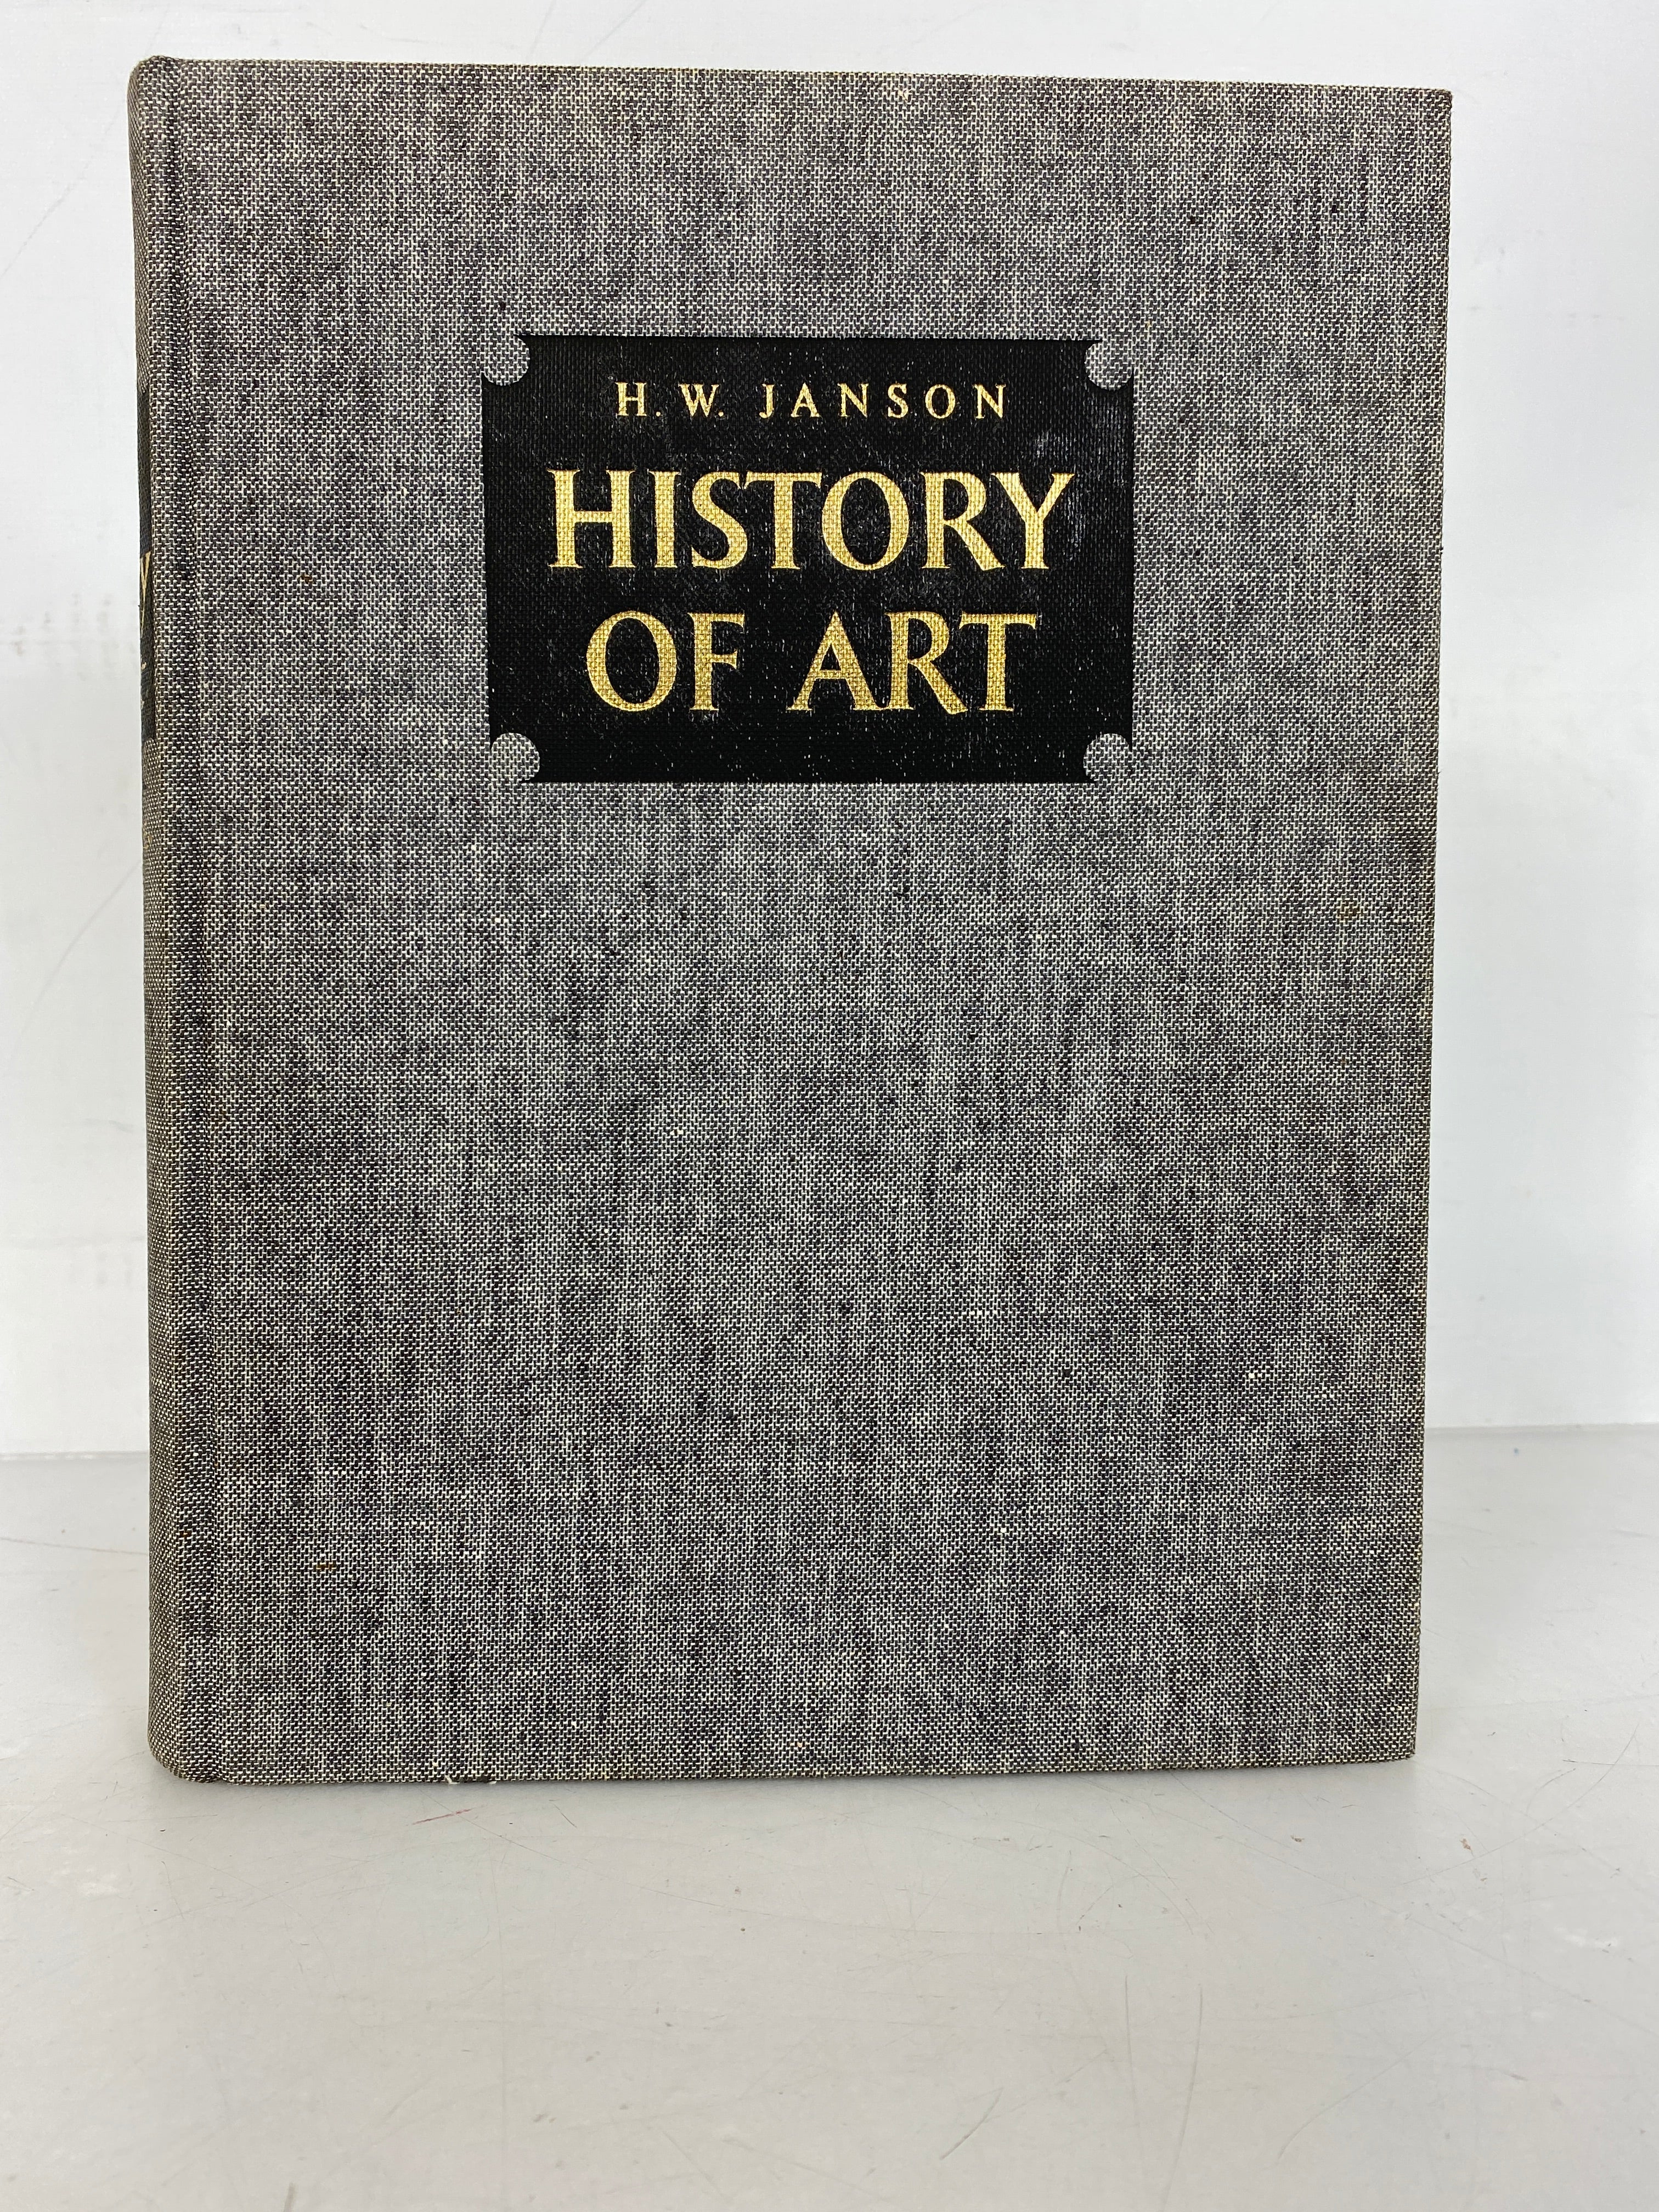 History of Art by H.W. Janson Fourth Printing 1963 HC